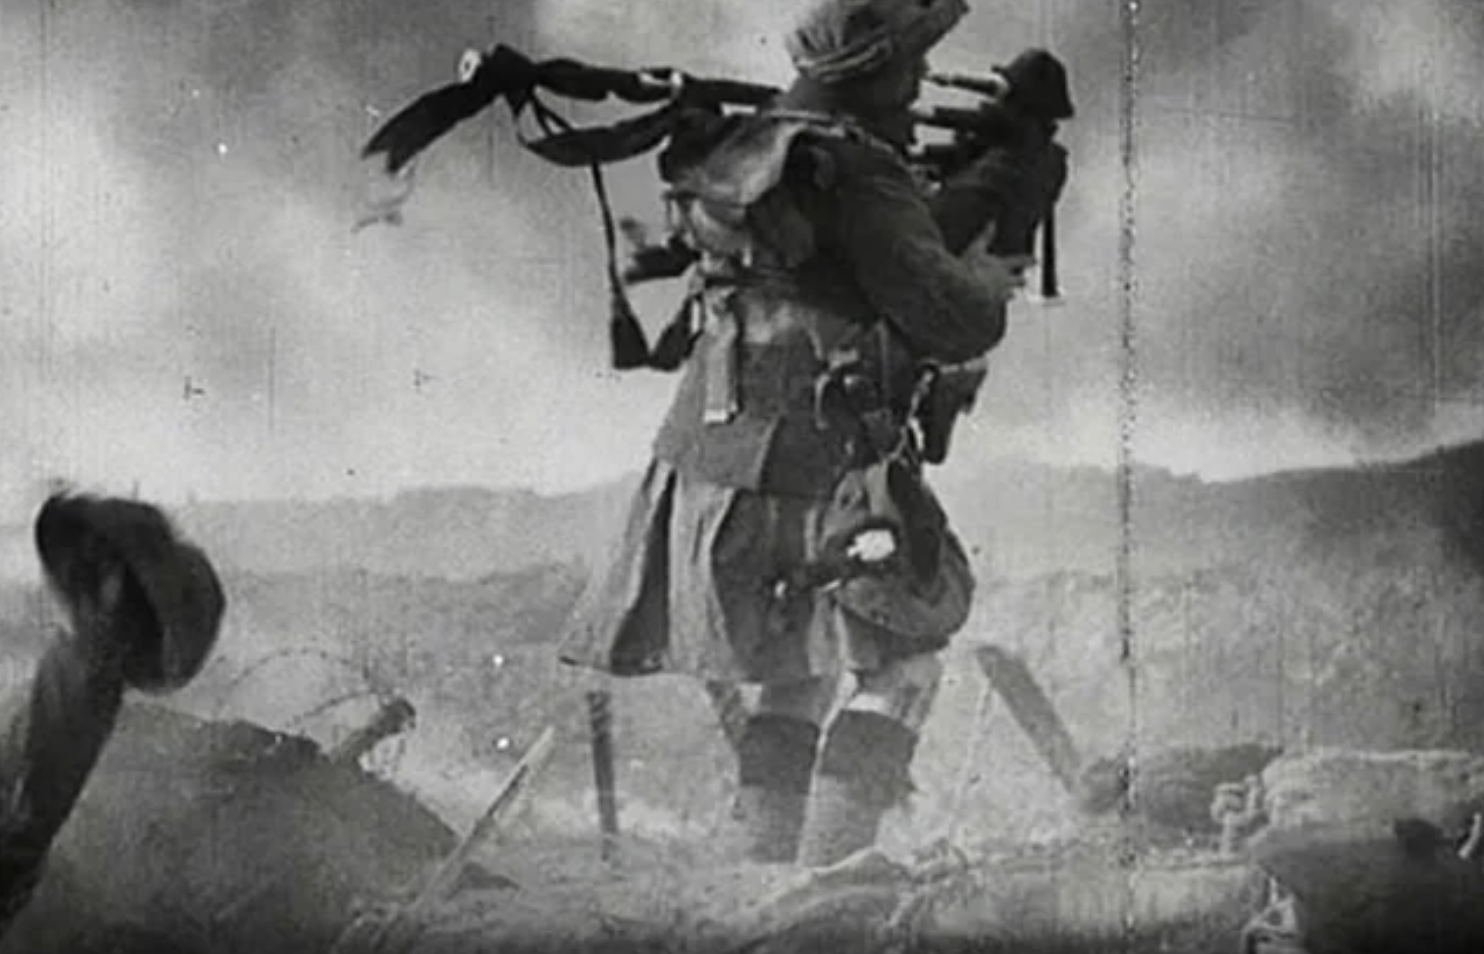 A Scottish piper wearing a kilt enters the battlefield during World War I.